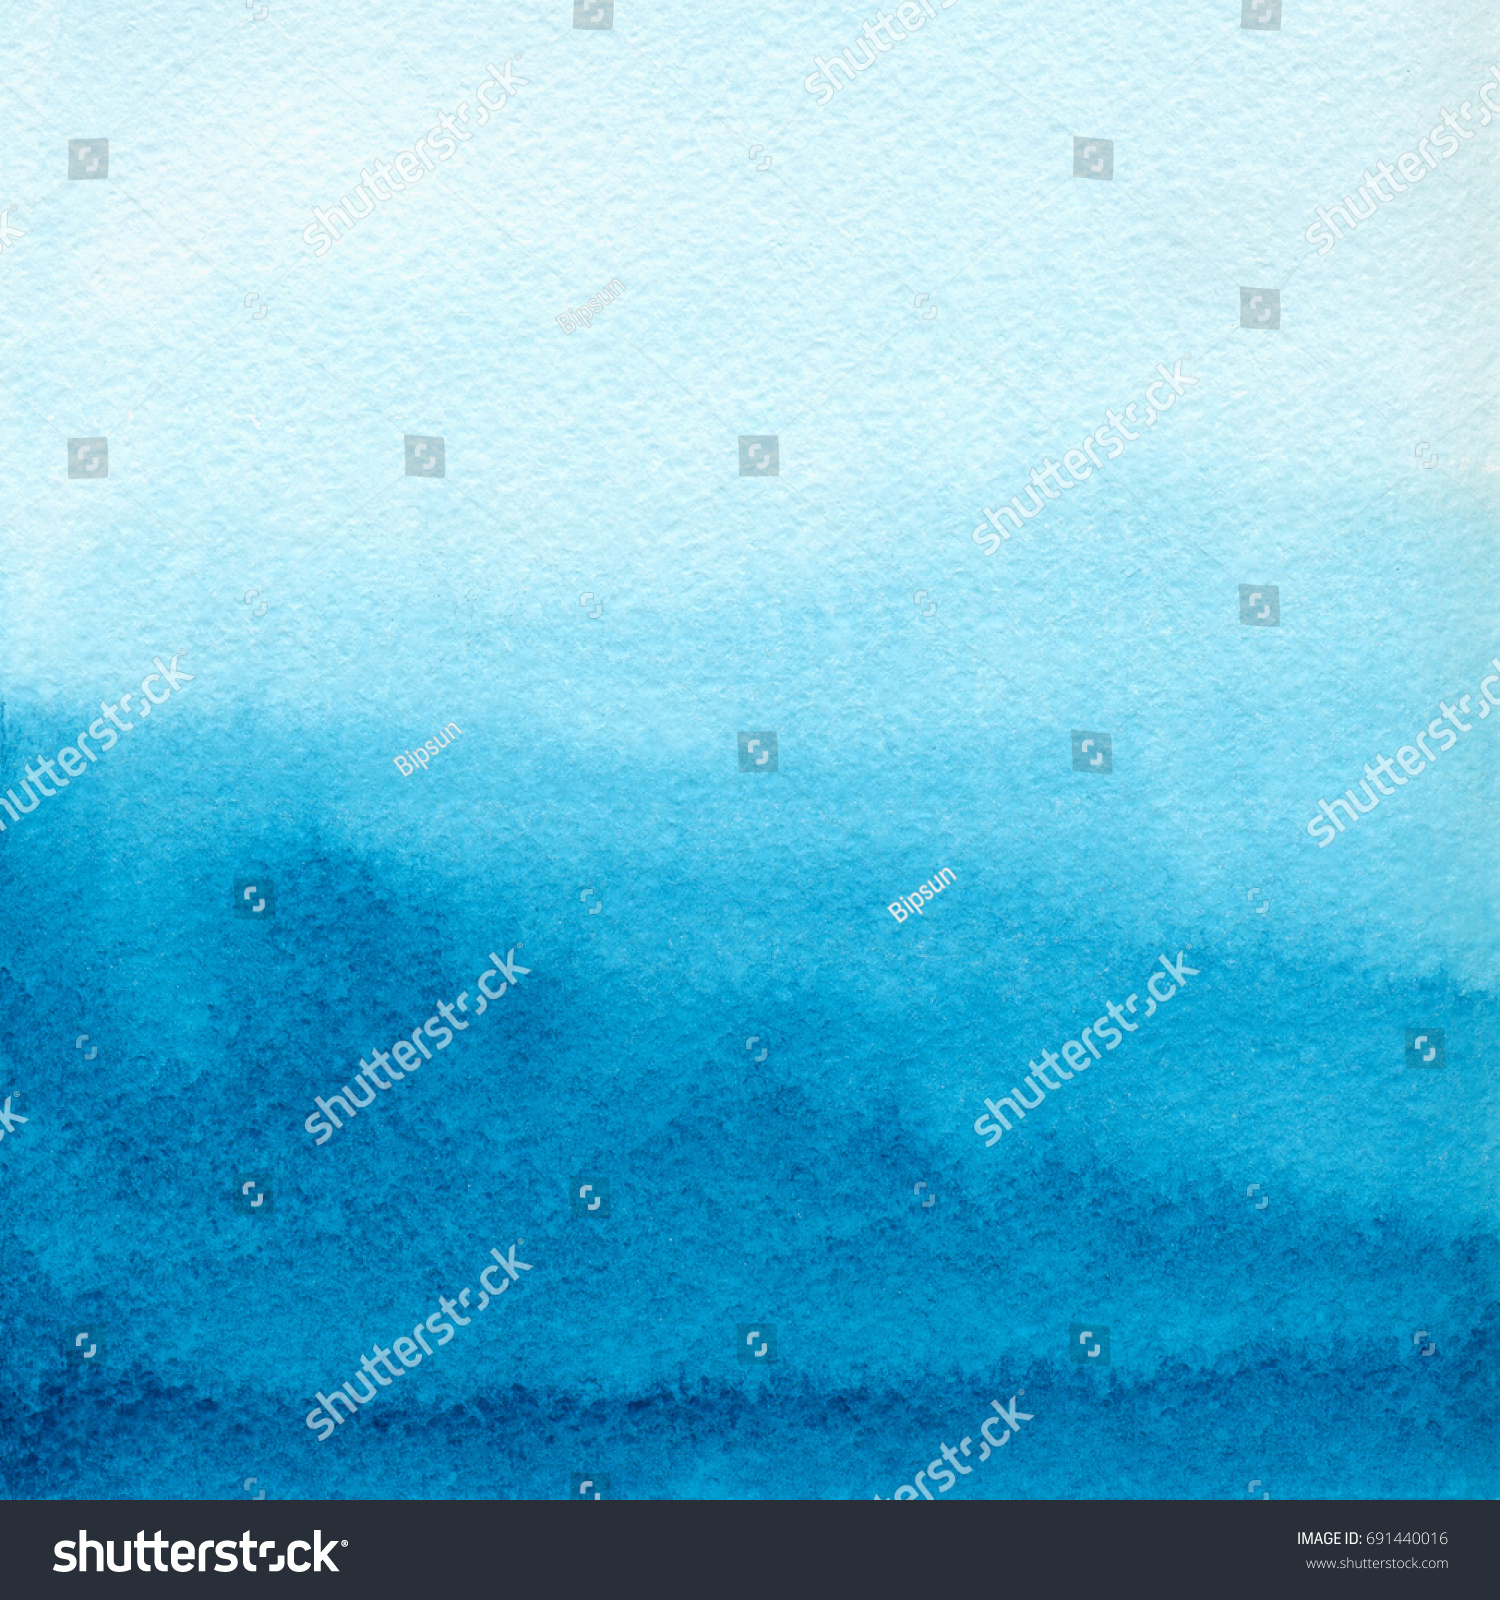 Hand painted watercolor background. Watercolor wash #691440016